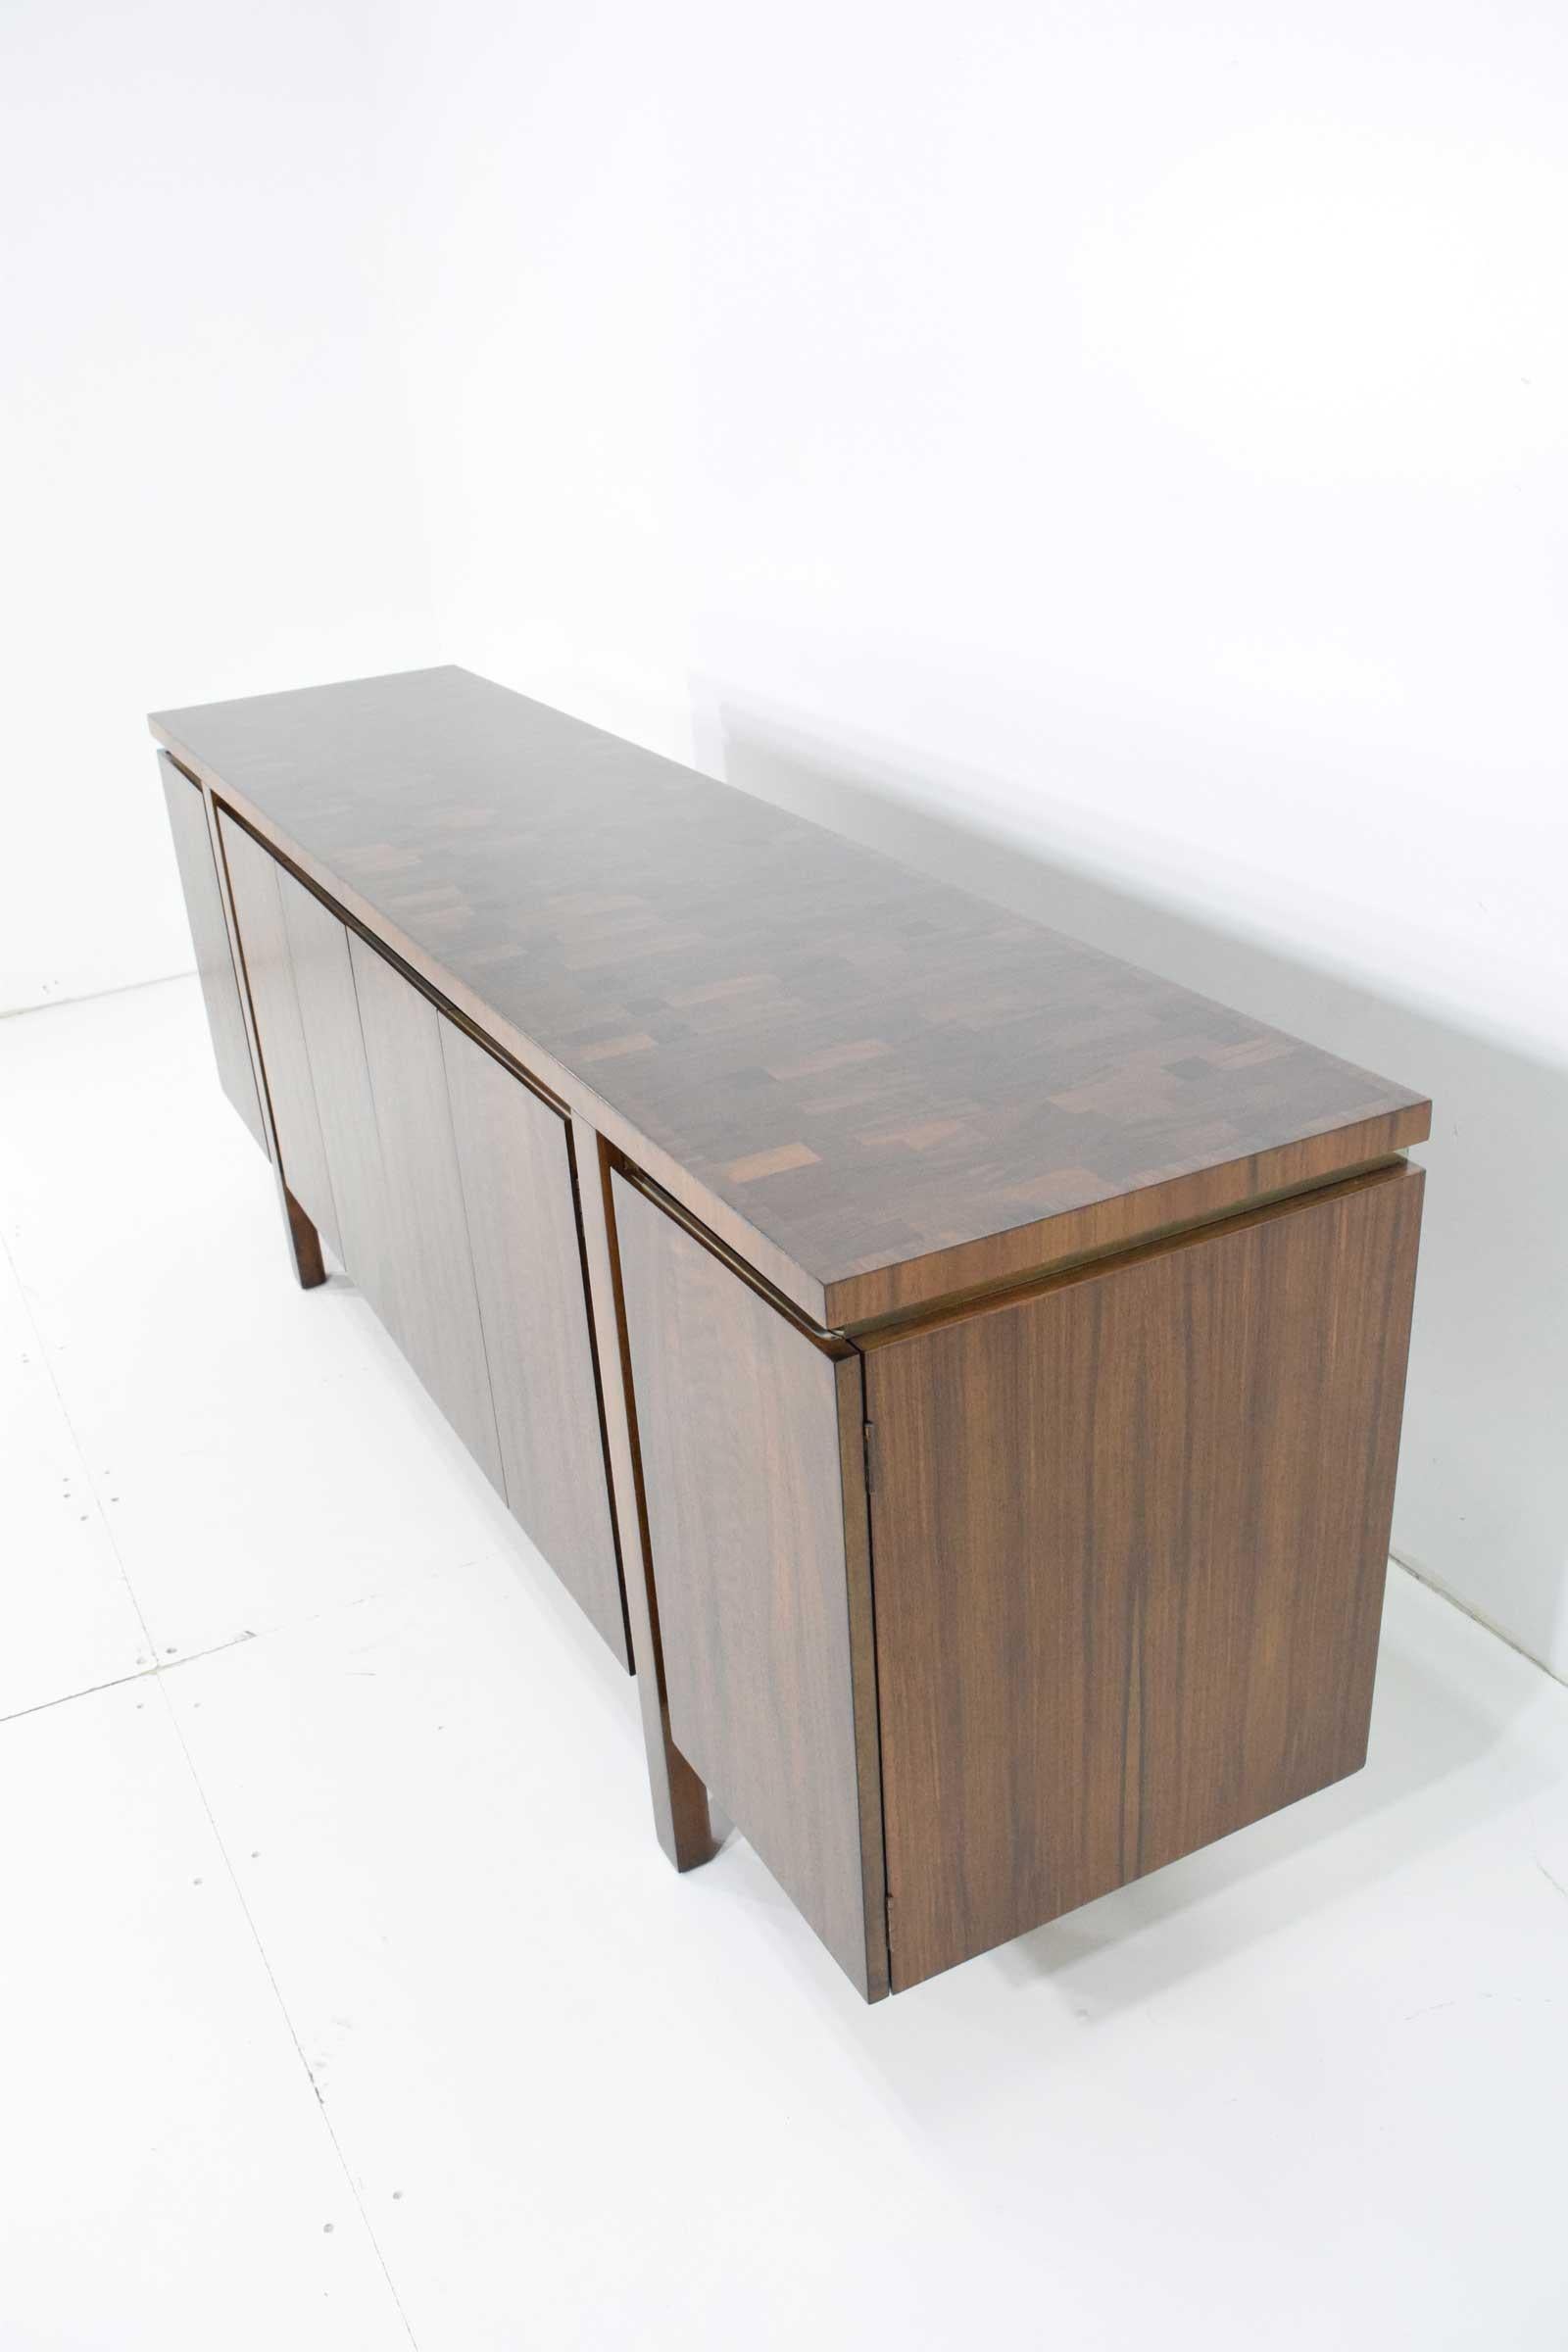 American Widdicomb Credenza or Sideboard in Walnut with Parquet Patterned Top